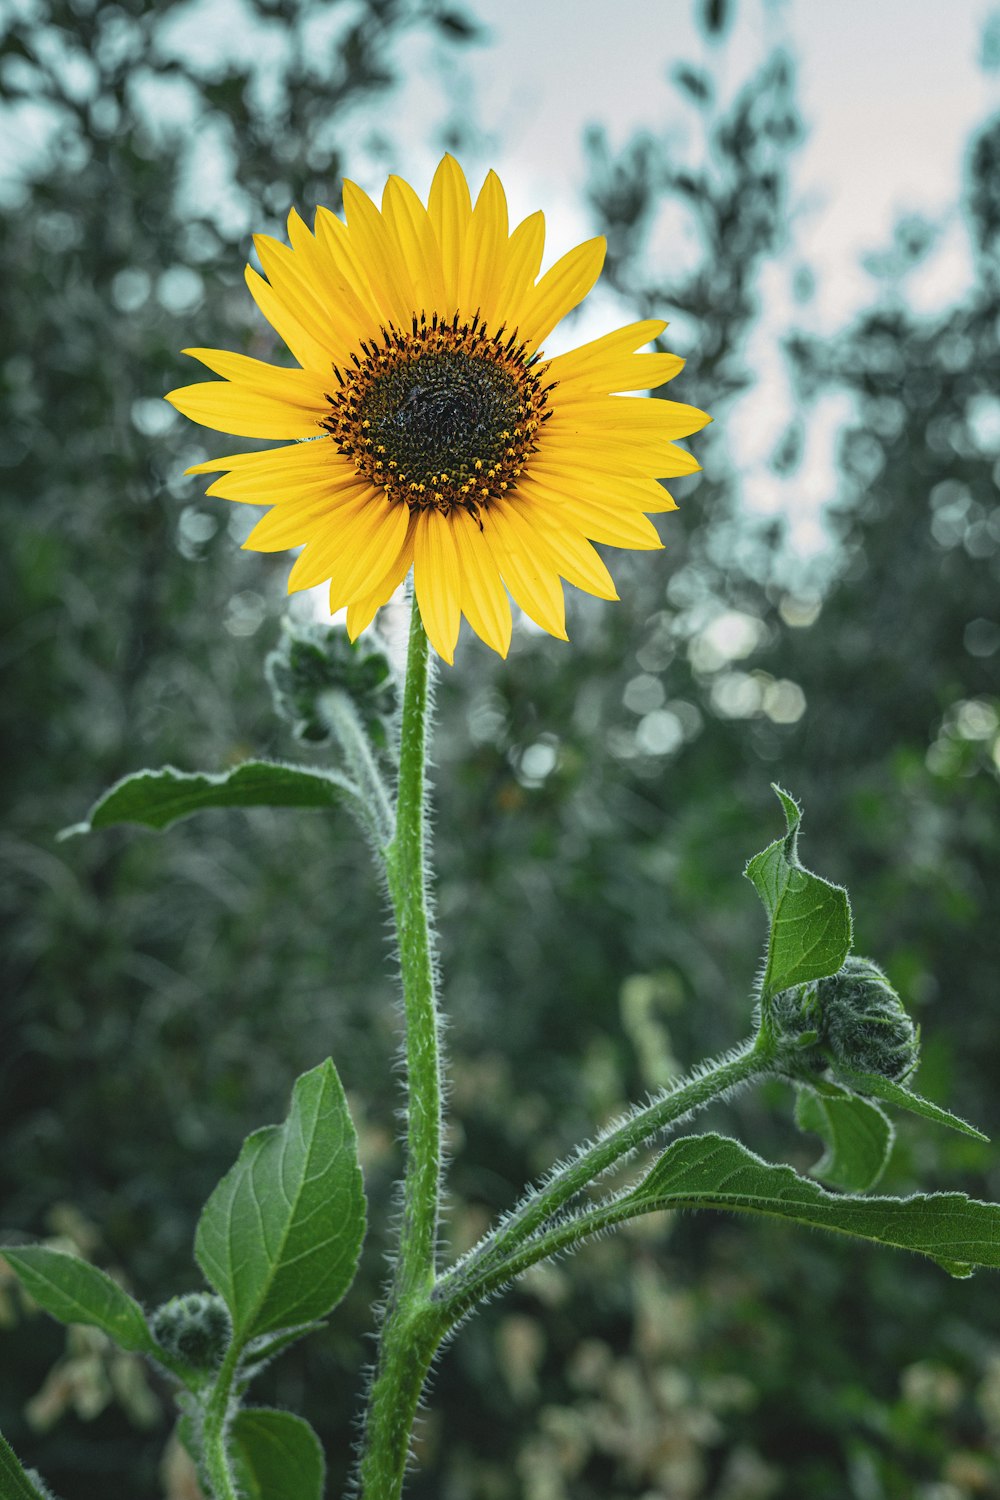 a yellow sunflower with green leaves in the foreground